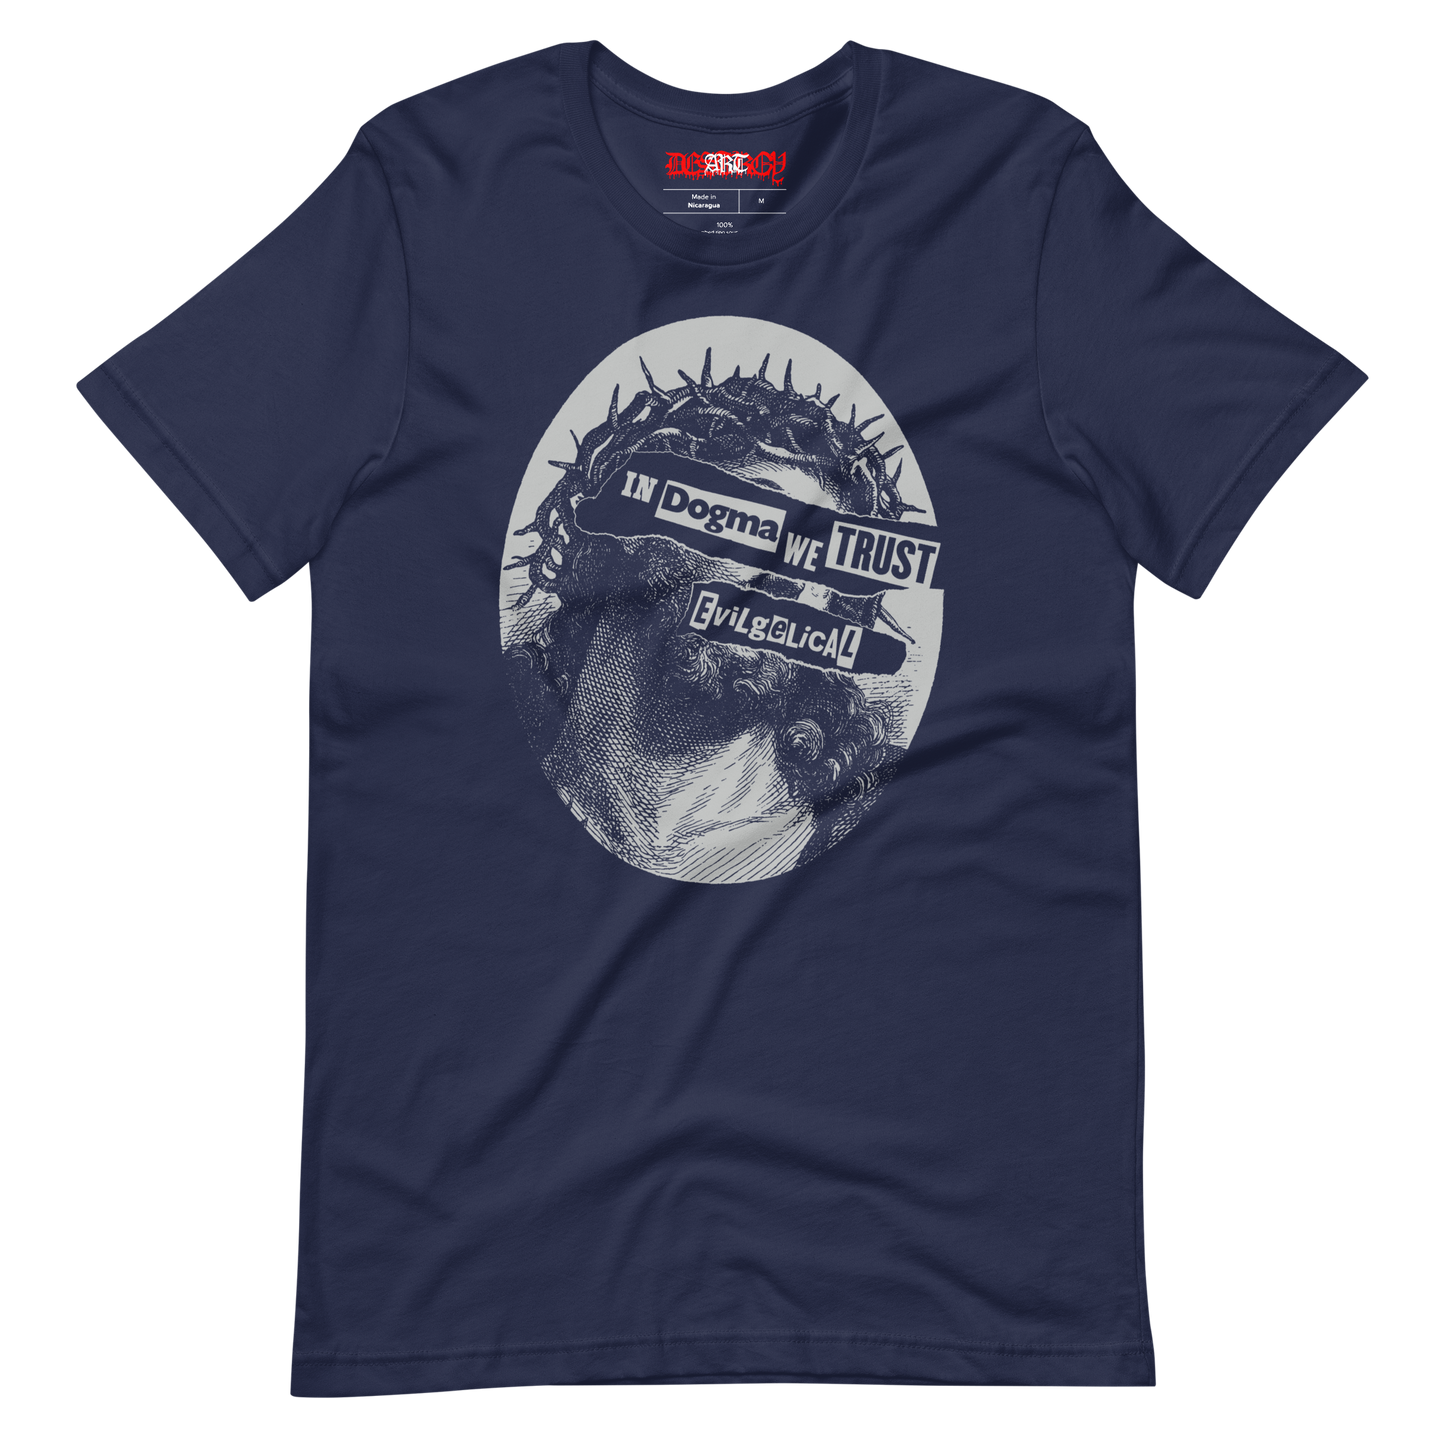 Stealworks "In Dogma We Trust" T-shirt